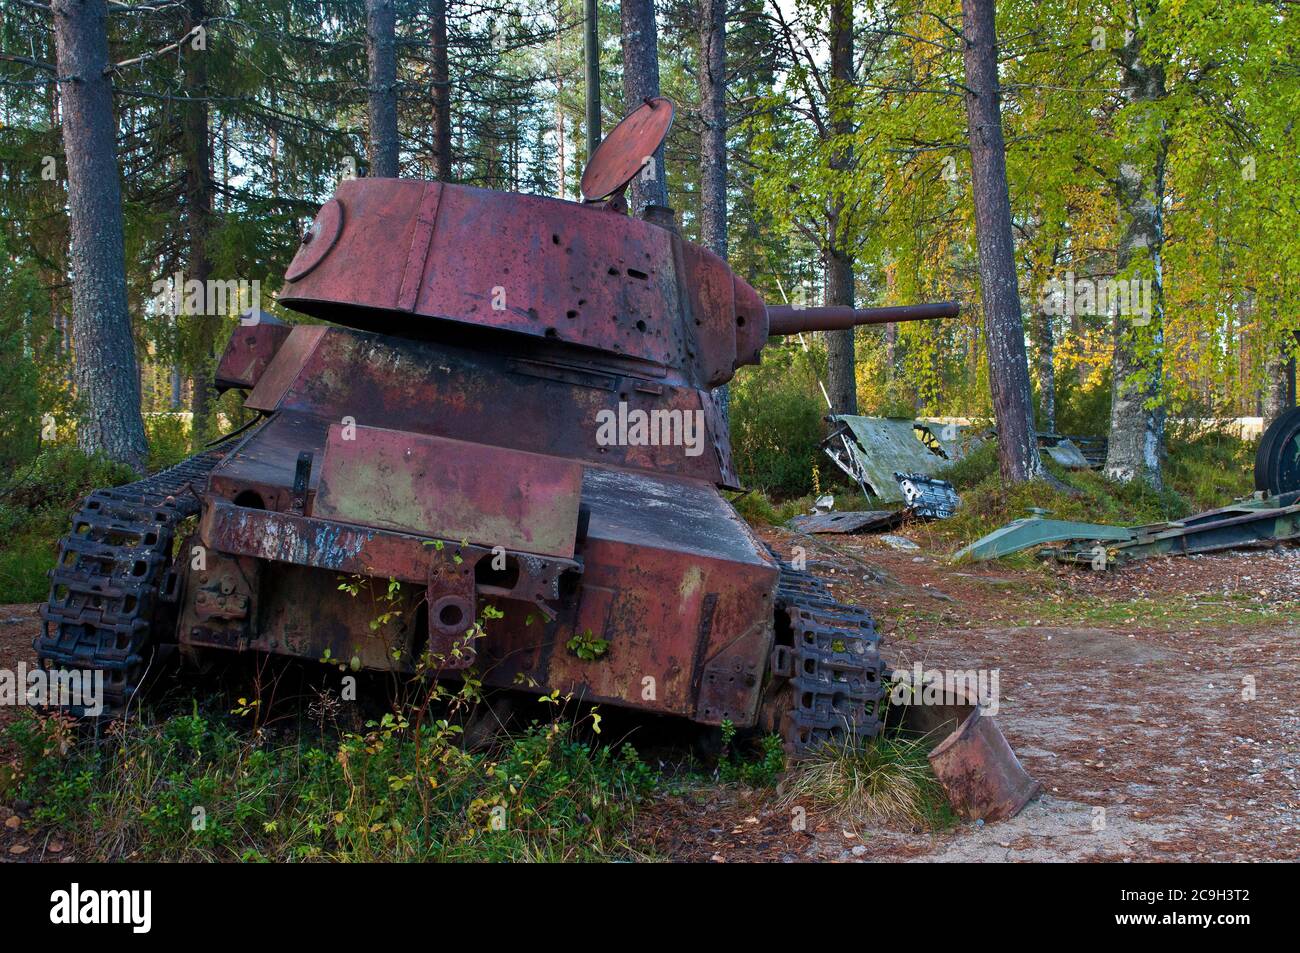 Wreckage of a tank from the Winter War near Suomussalmi, Finland. Stock Photo